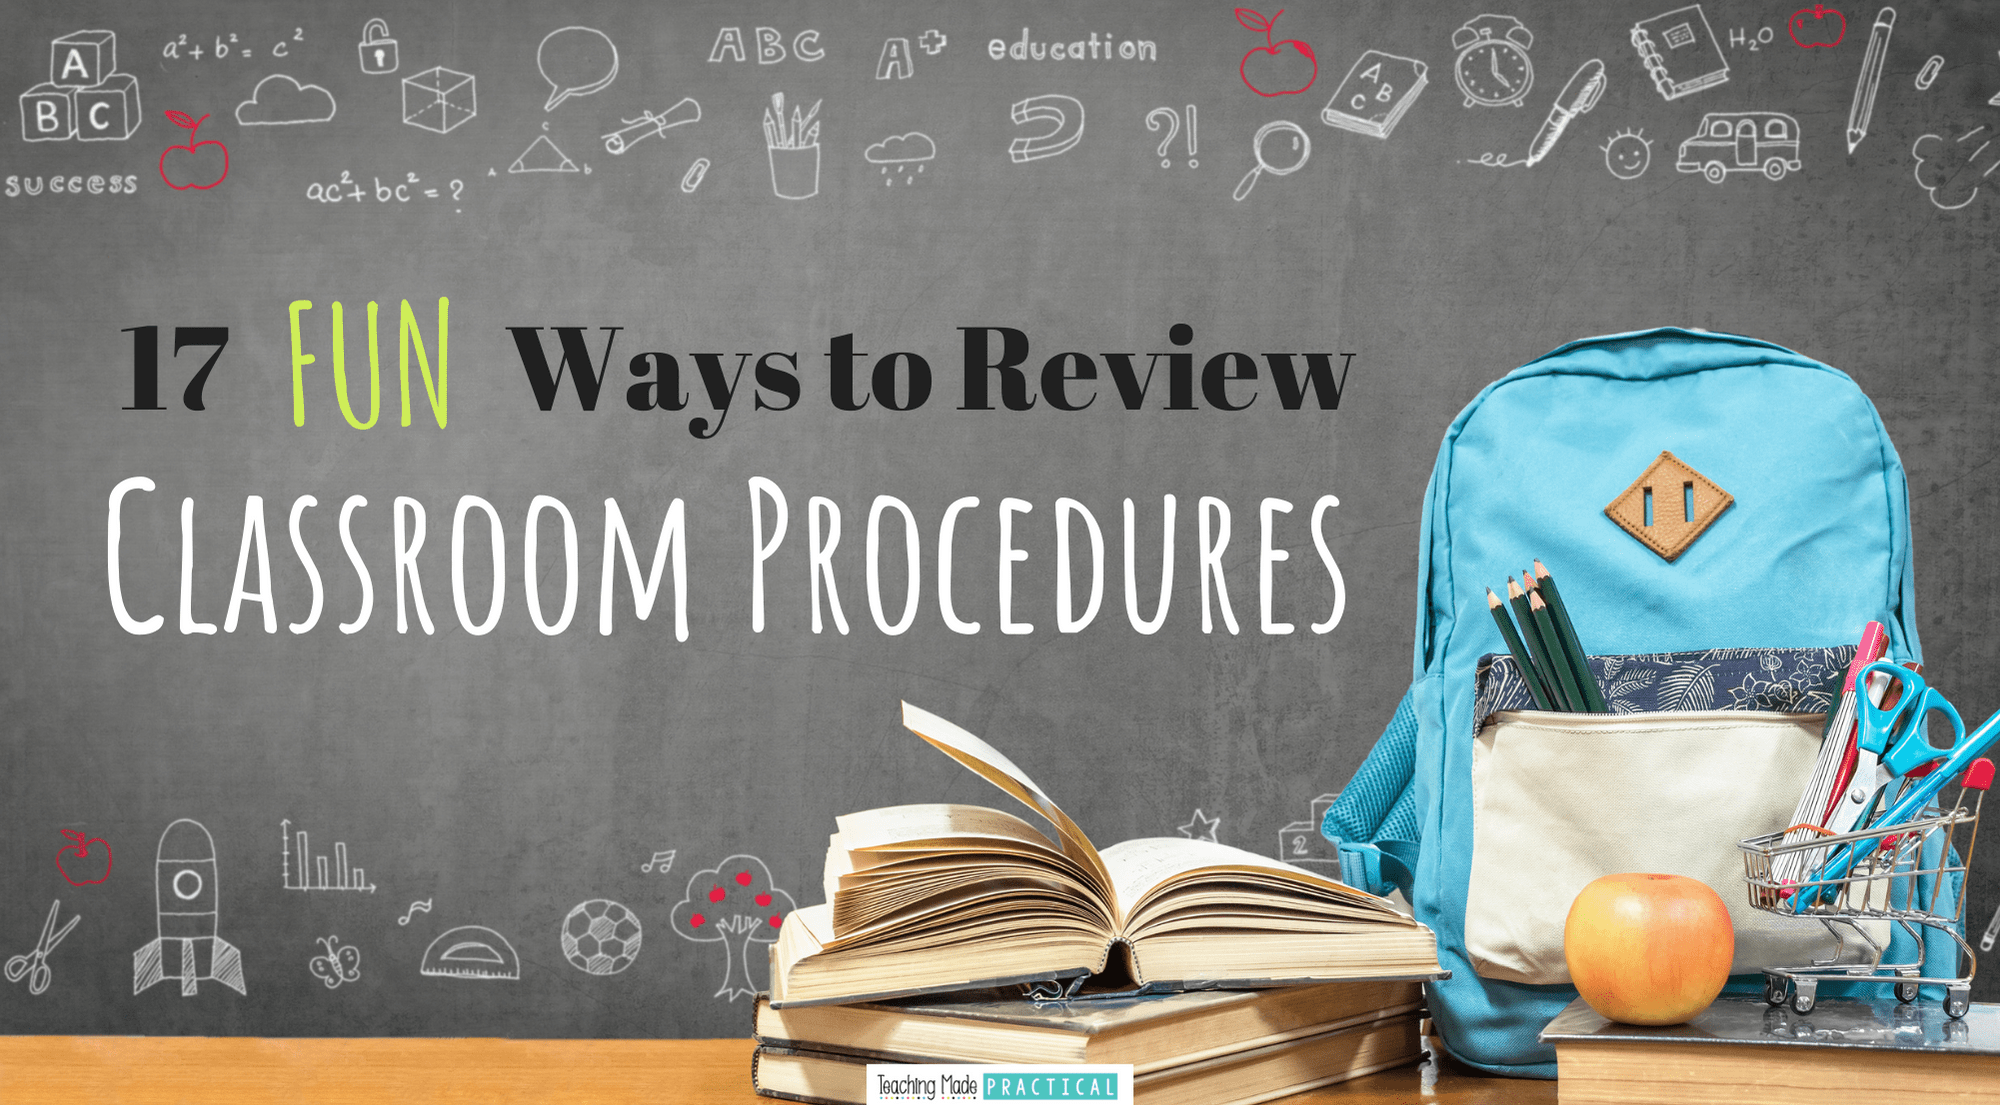 17 fun ways to review classroom procedures with 3rd, 4th, and 5th grade students